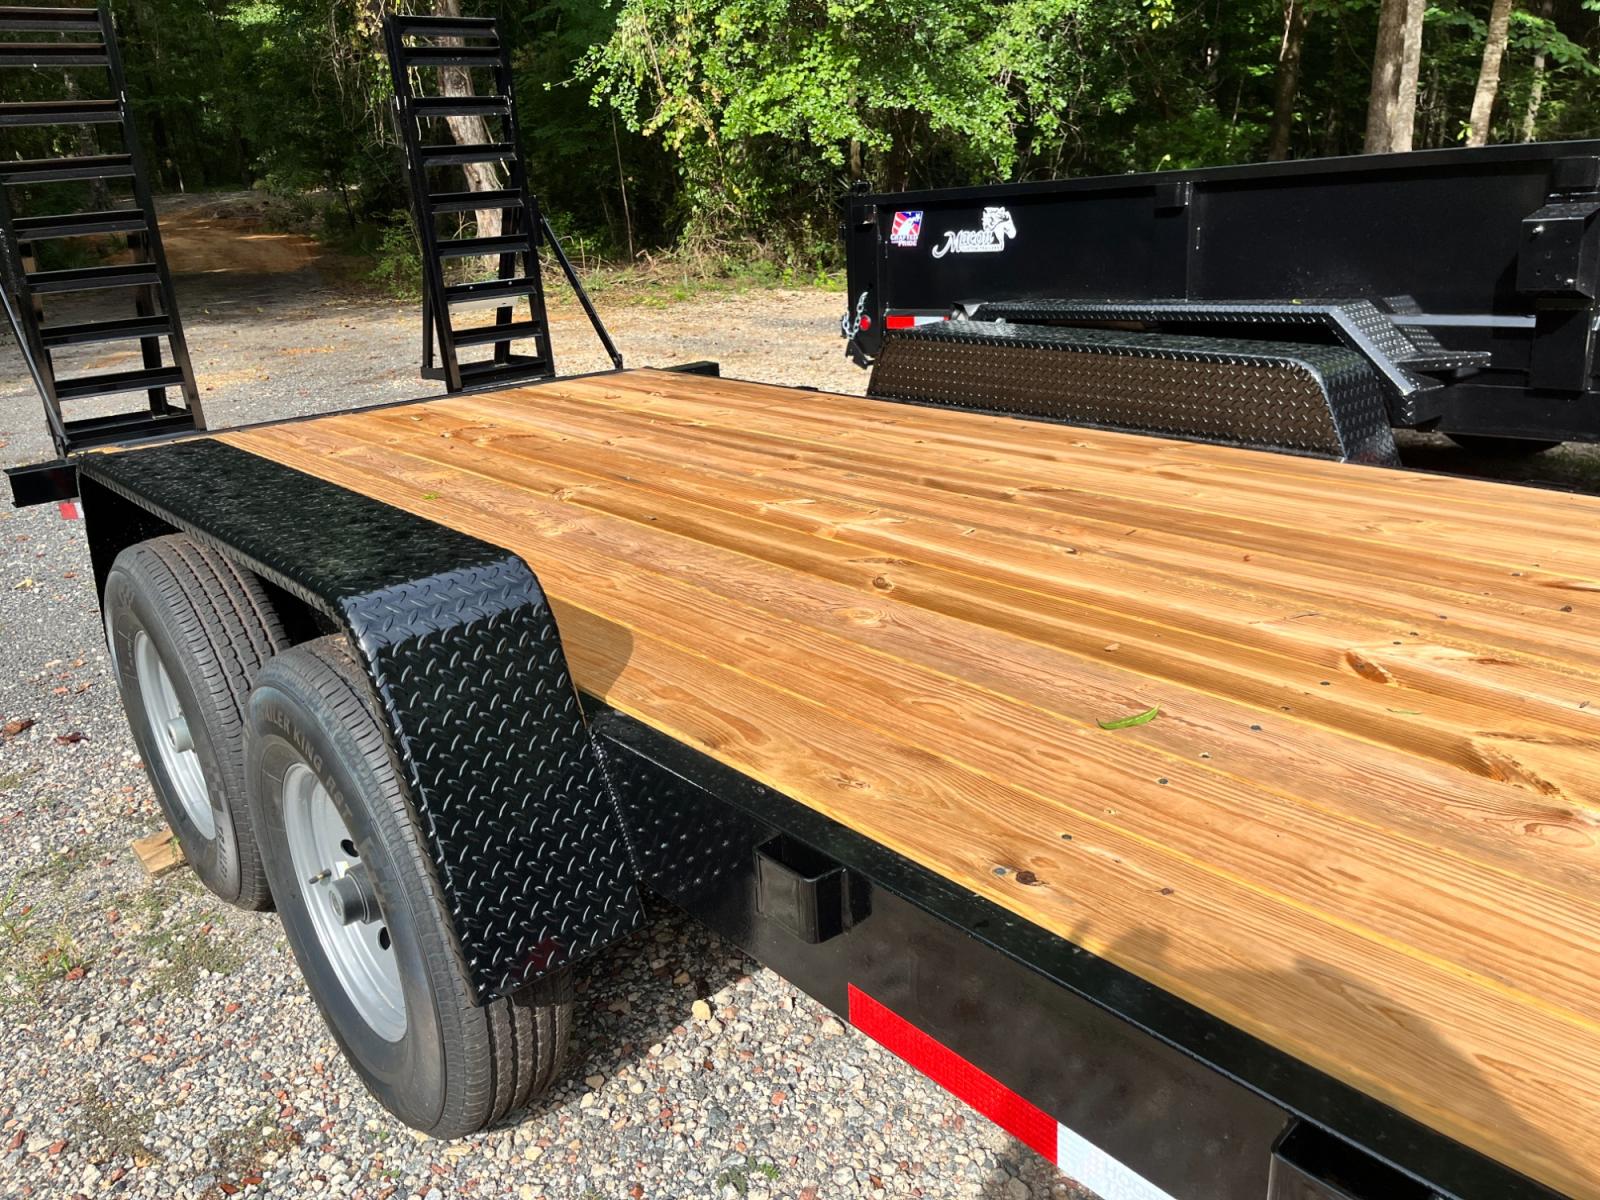 2022 Macon Custom Trailers 7ft X 20ft Flatbed 7 Ton , located at 1330 Rainey Rd., Macon, 31220, (478) 960-1044, 32.845638, -83.778687 - Brand New 2022 Model "Top of the Line" Flatbed BobCat & Equipment Trailer! 7ft X 20ft Including the 24" Beavertail 7k lb Brake Axles! Haul Your Truck, Tractor, BobCat, Mini-Excavator, UTV's, ATV's Etc. Tandem 7,000lb Dexter Axles, Electric Brakes on Both Axles too! 235/80X16" Radials 8" Channel - Photo #10